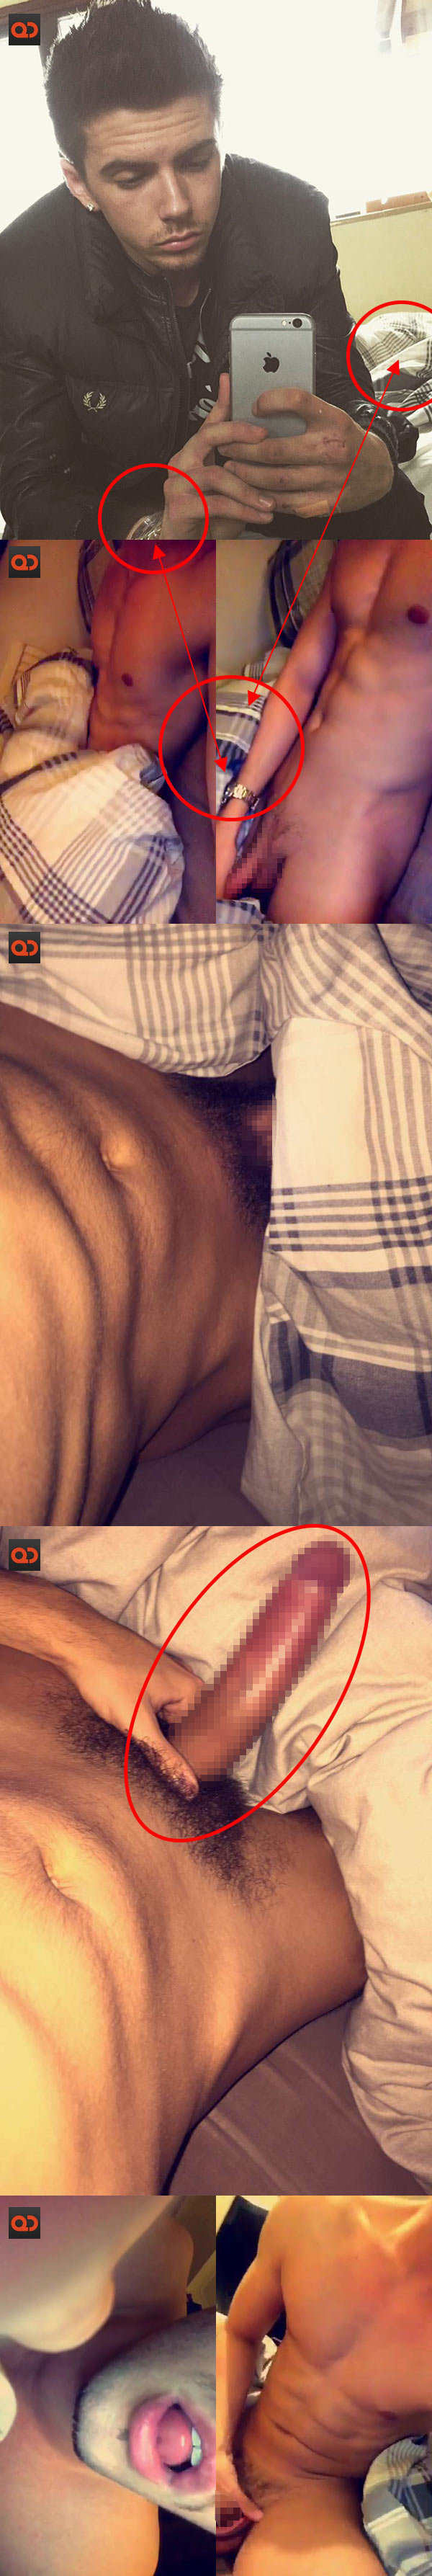 Leon Mallett, From The X Factor UK Series 14, Caught Stroking His Super Long Cock In Alleged Leaked Videos and Snaps!